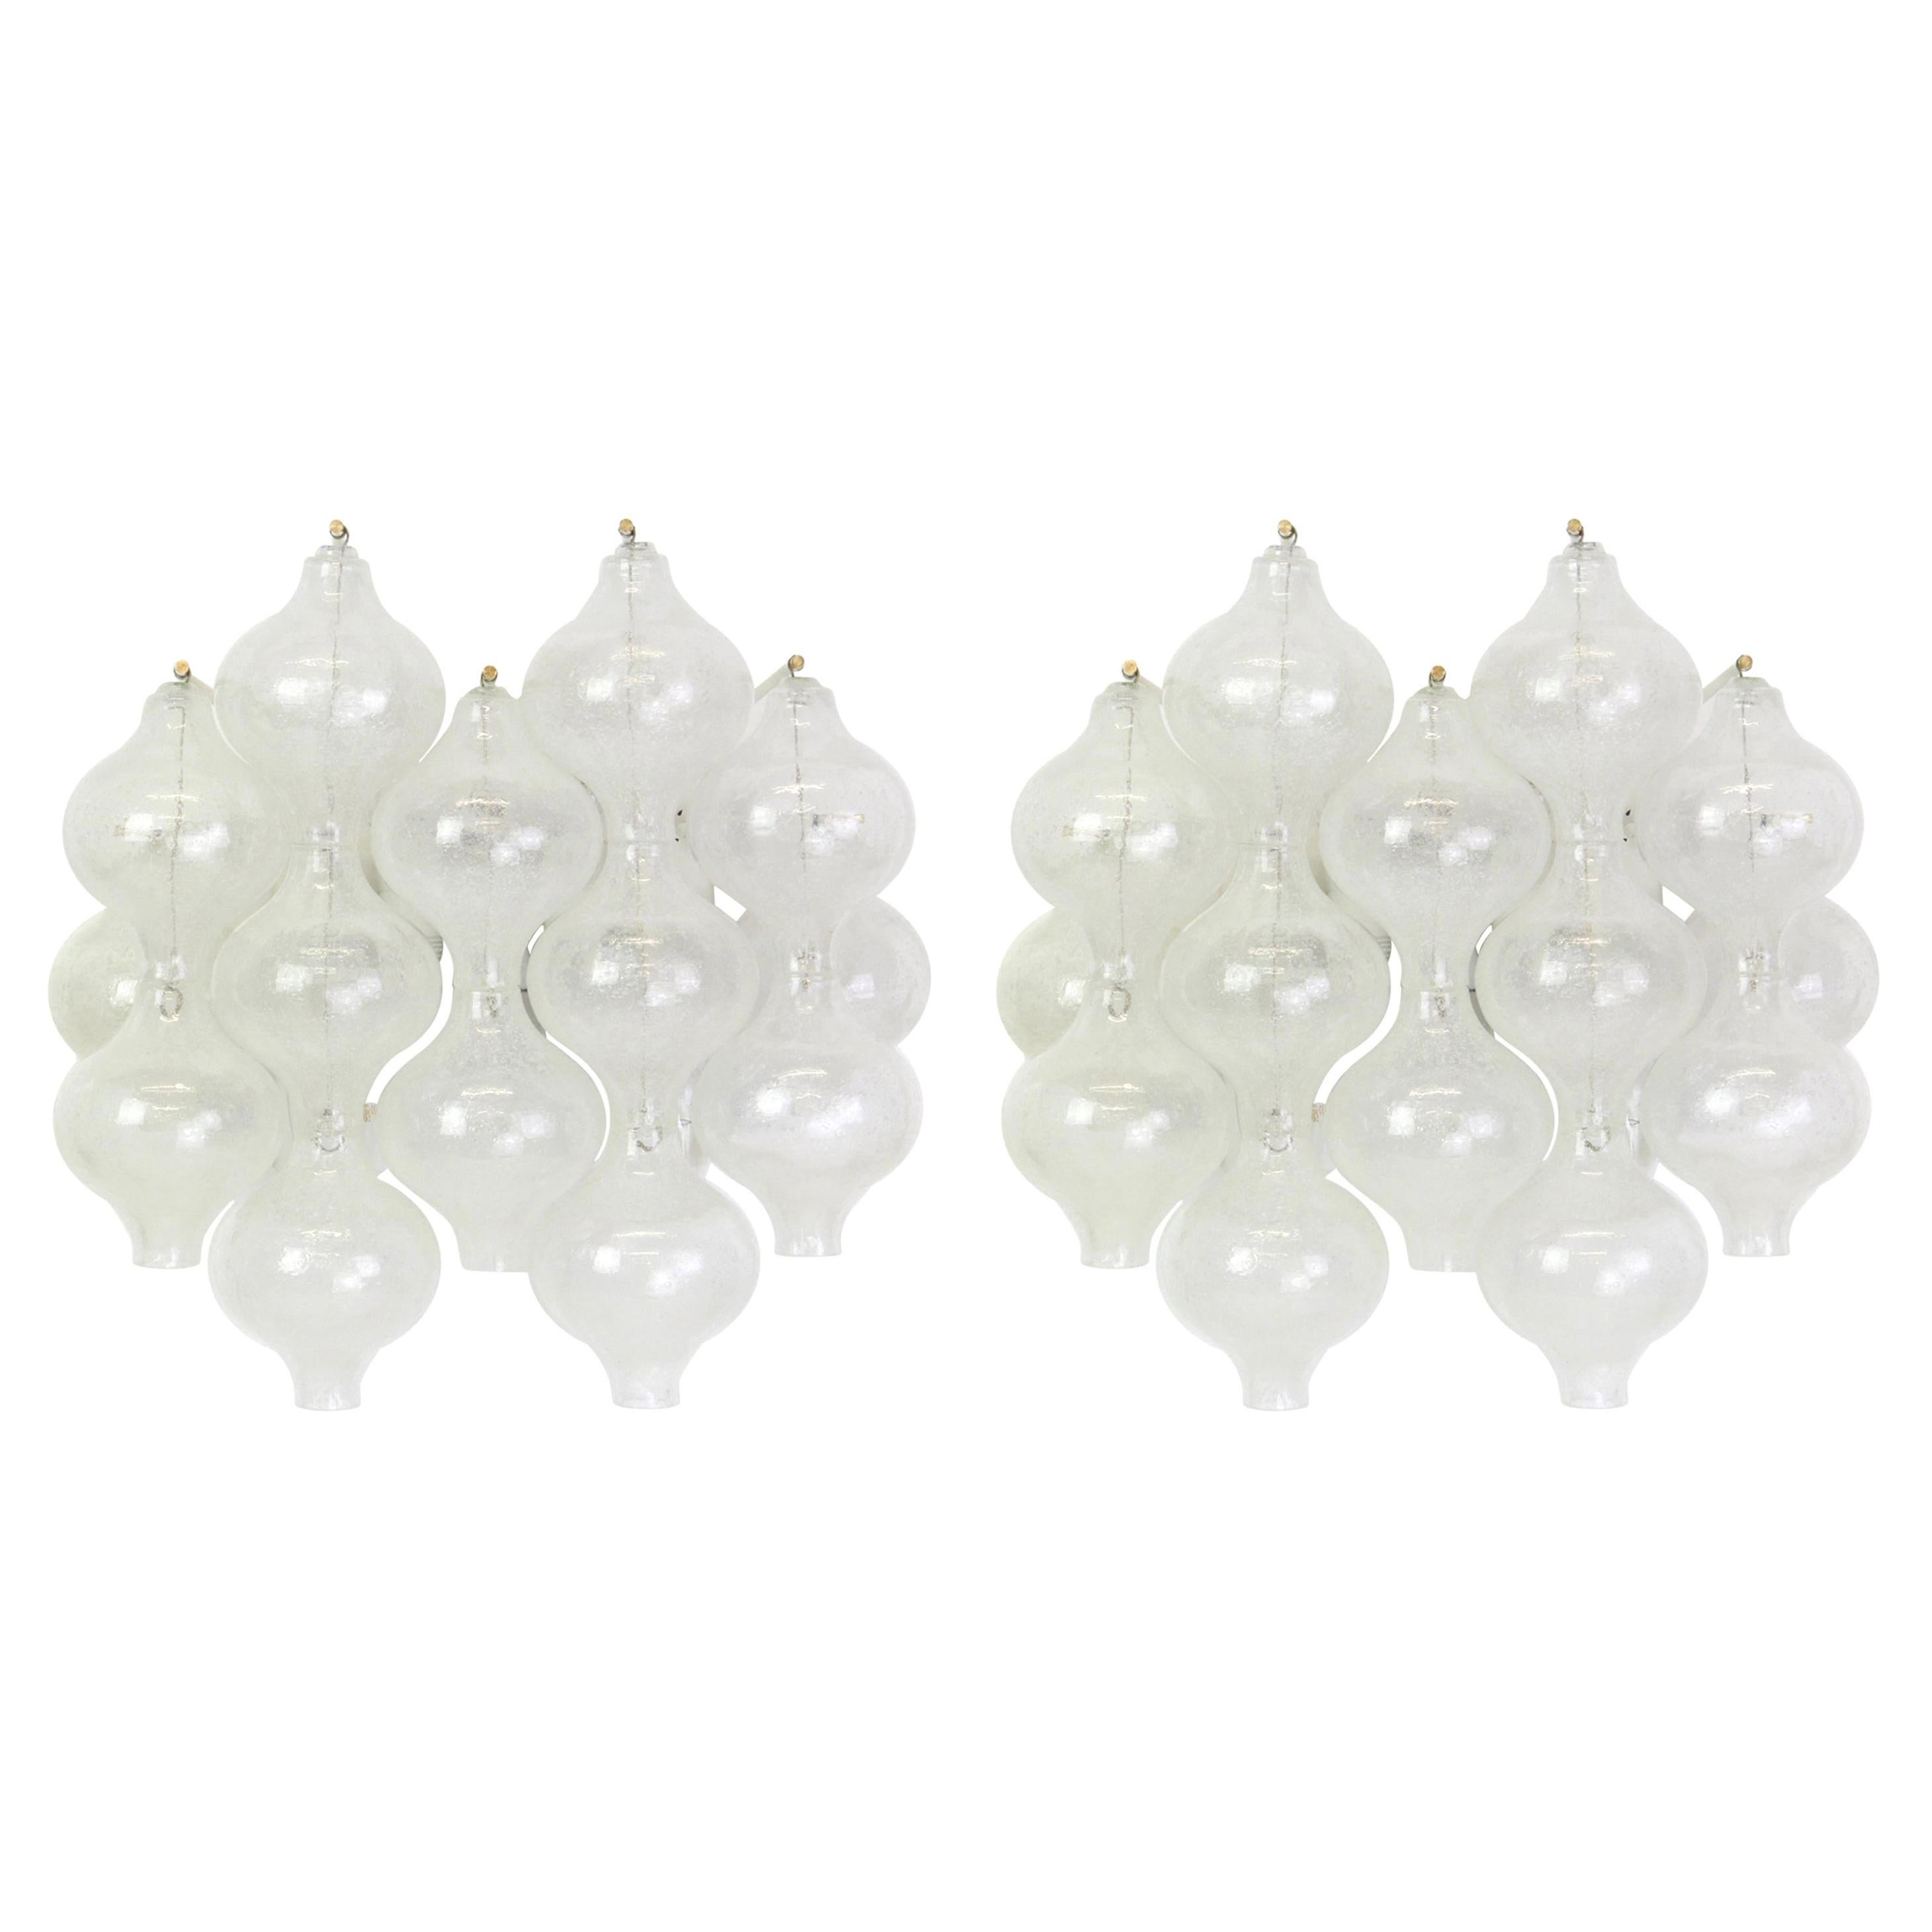 1 of 4 Pairs of Large Kalmar 'Tulipan' Sconces Wall Lights, Austria, 1970s For Sale